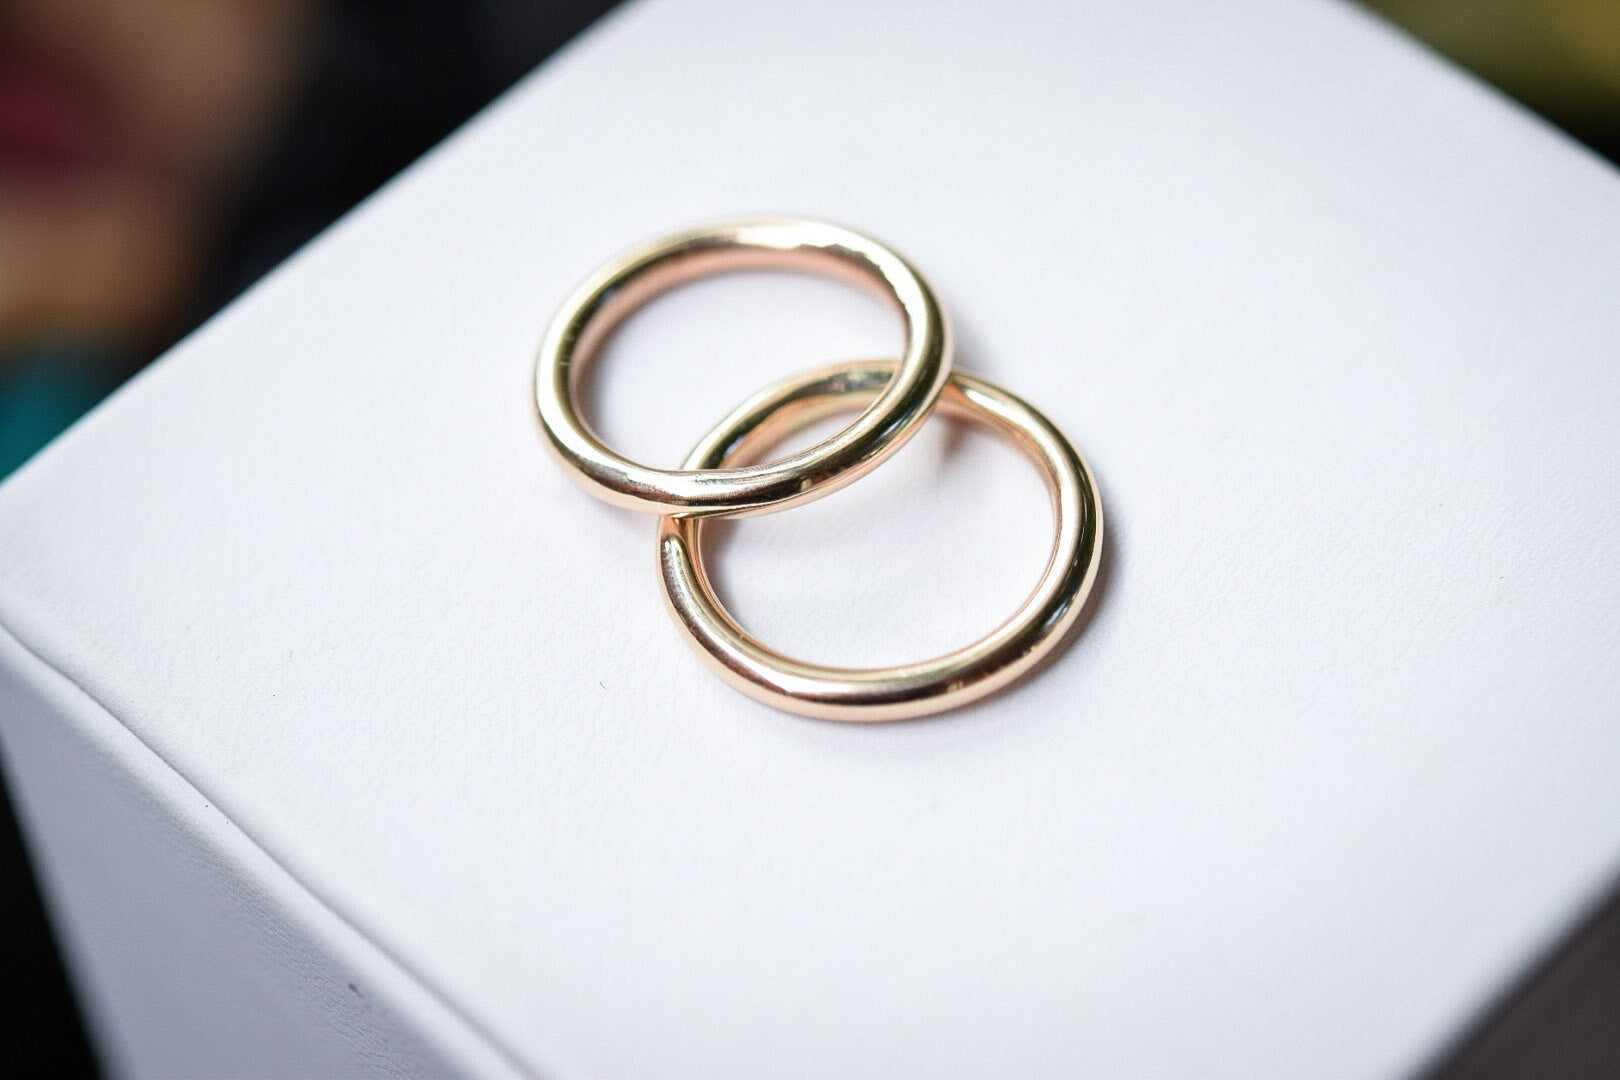 Thick Gold Stacking Ring/ Gold-Filled/ Heavy Gauge Stacking Ring